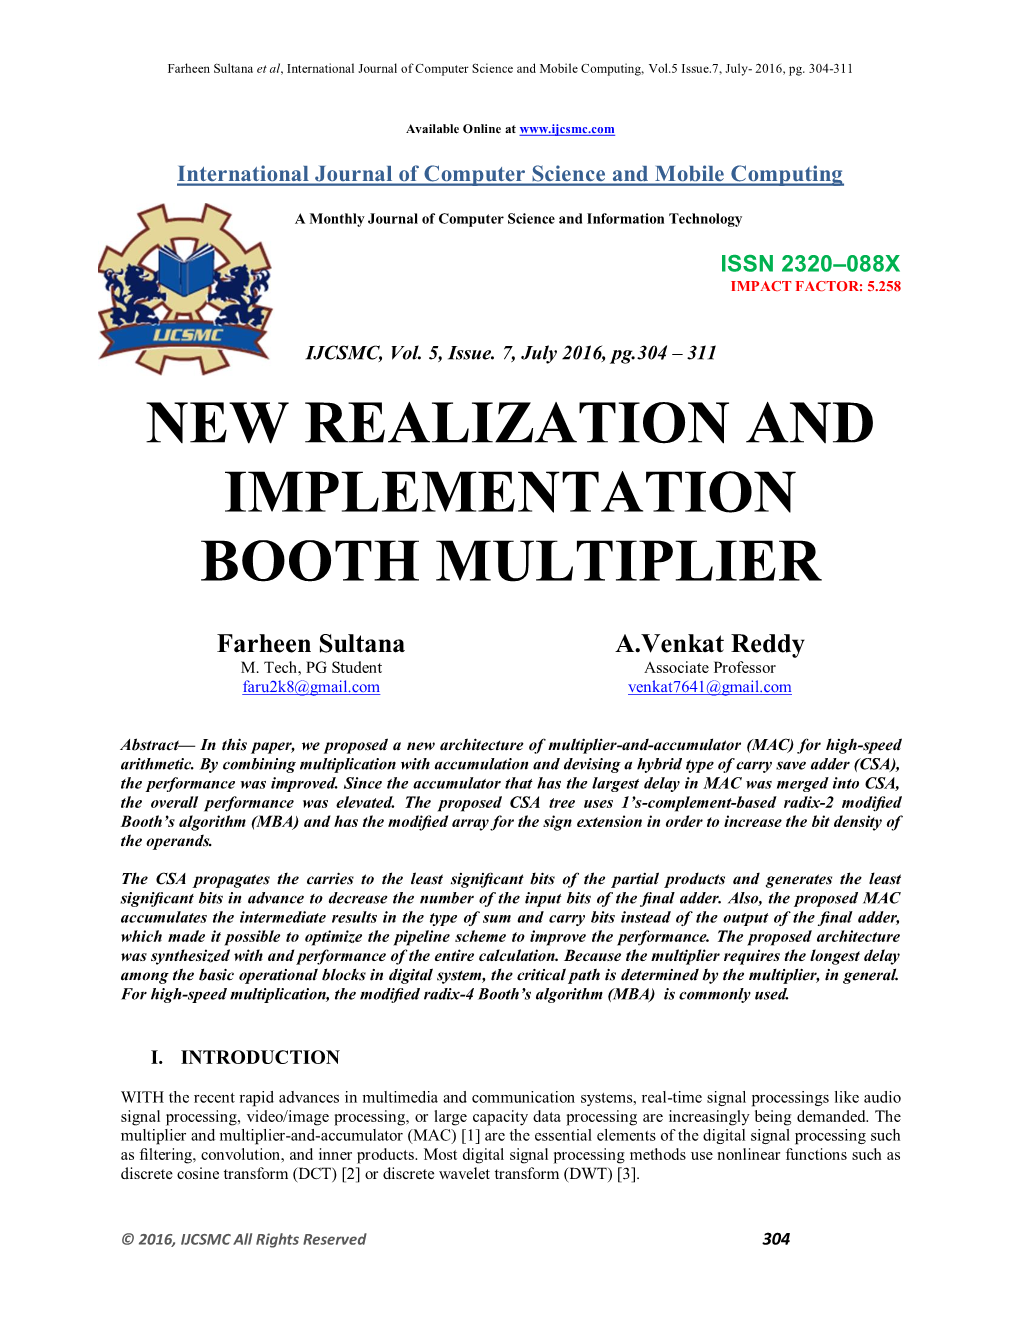 New Realization and Implementation Booth Multiplier